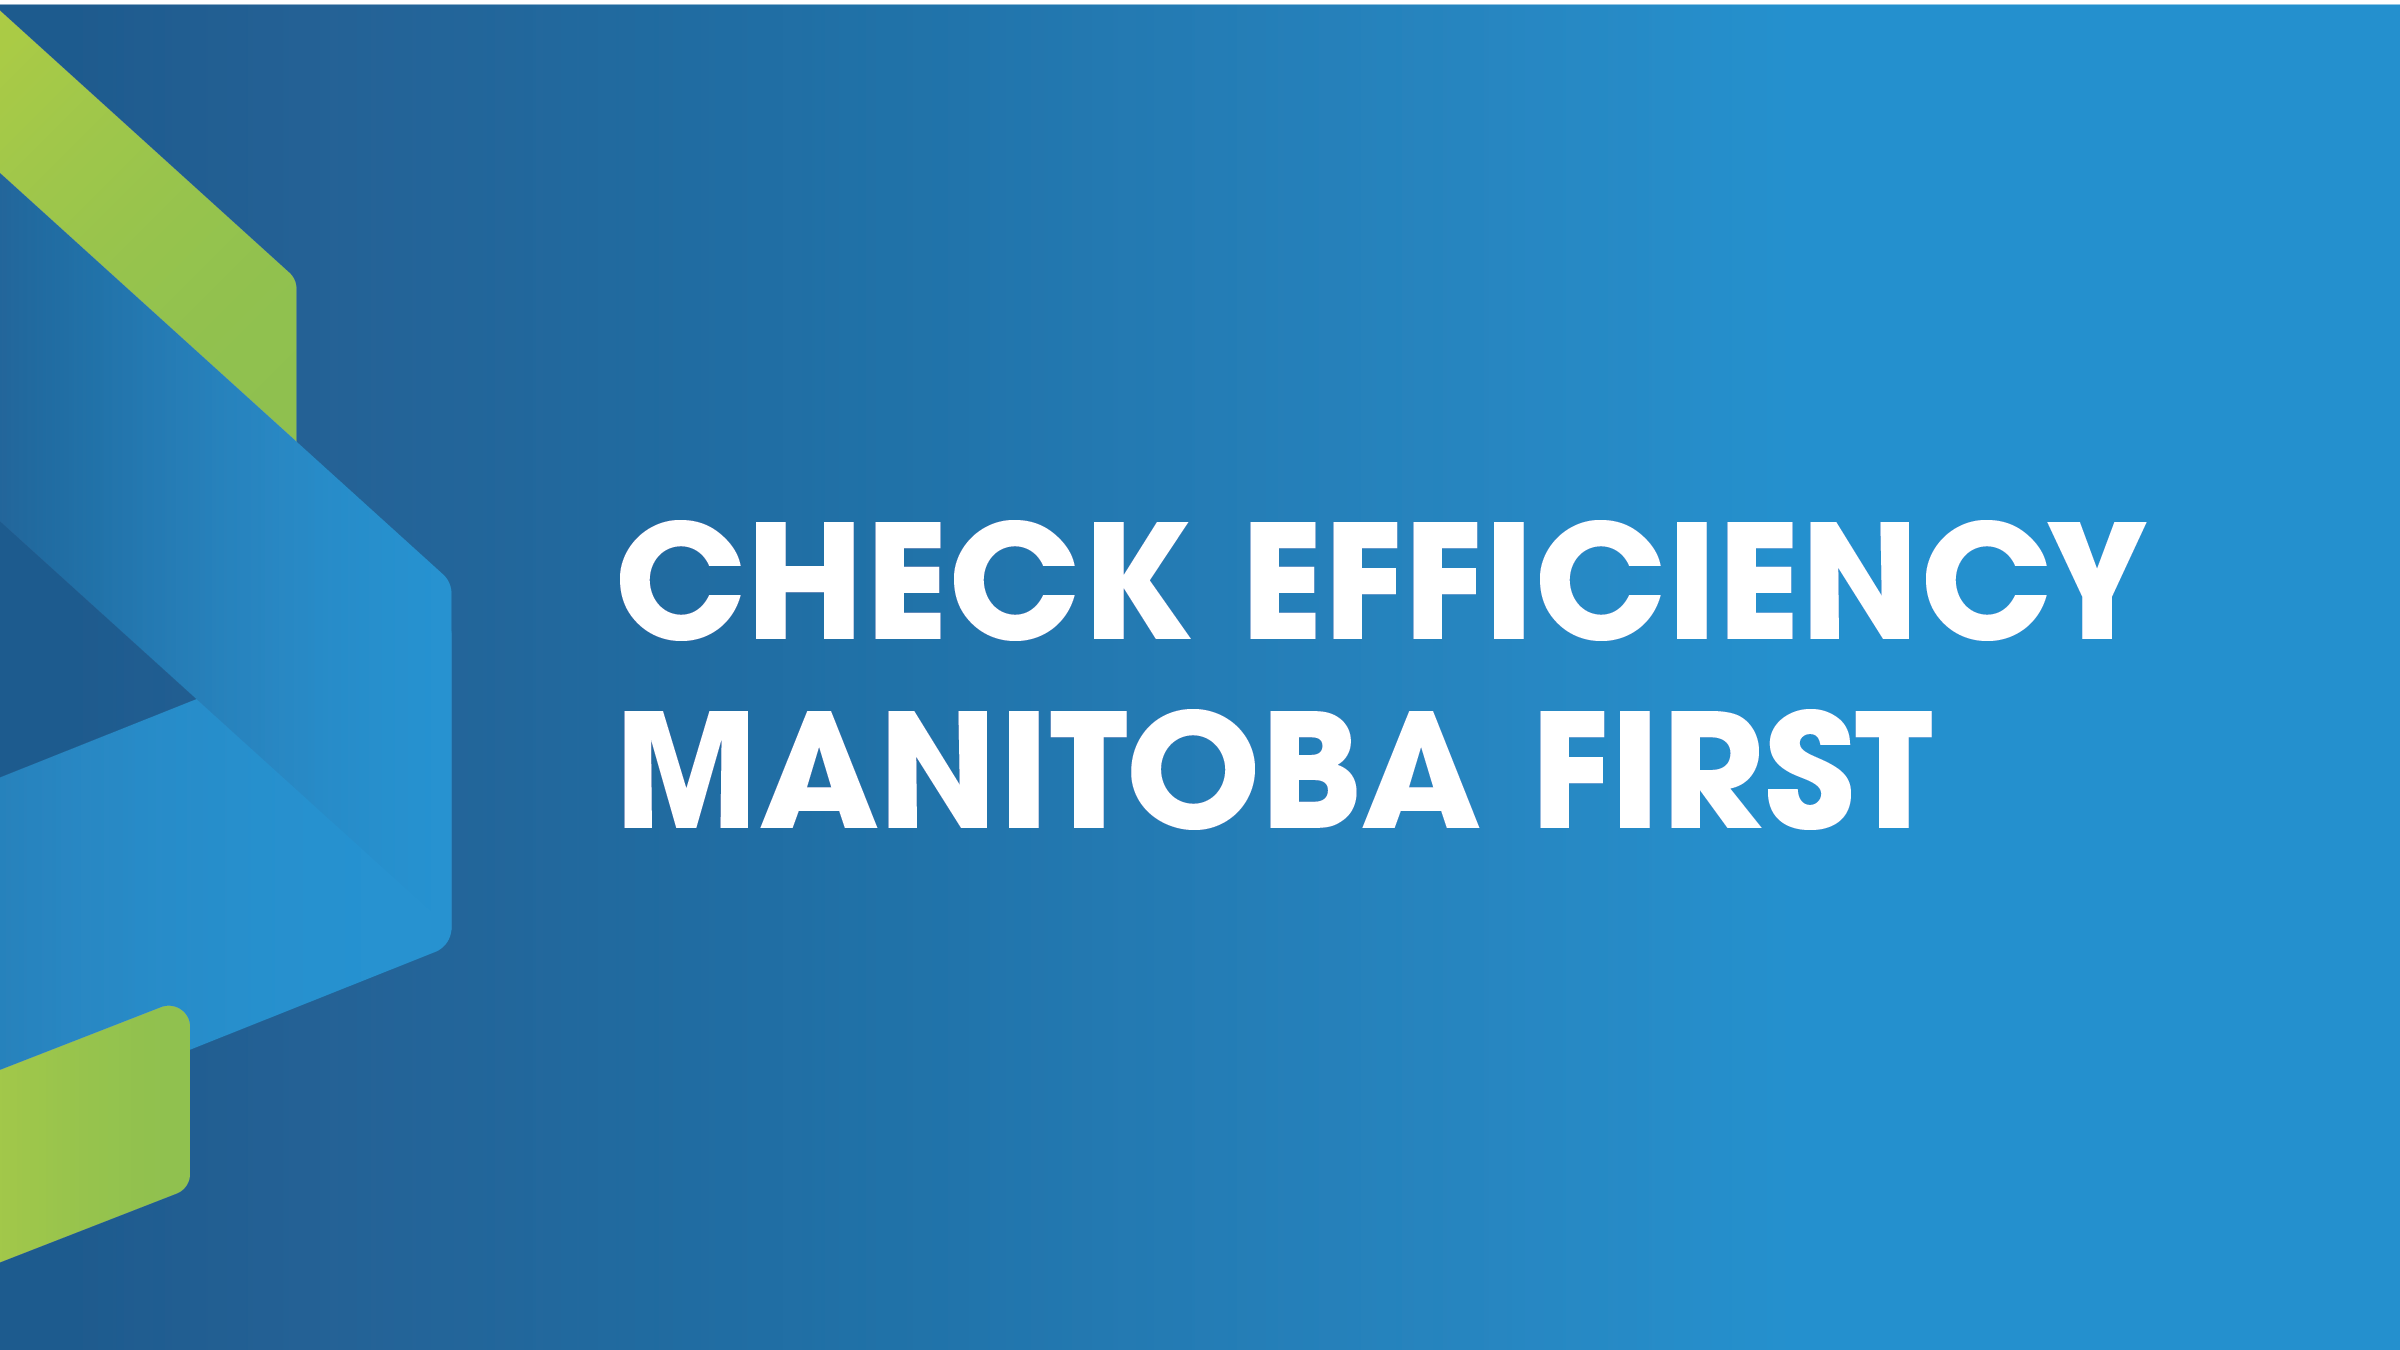 Rising home renovation costs means it's best to check Efficiency Manitoba first for savings